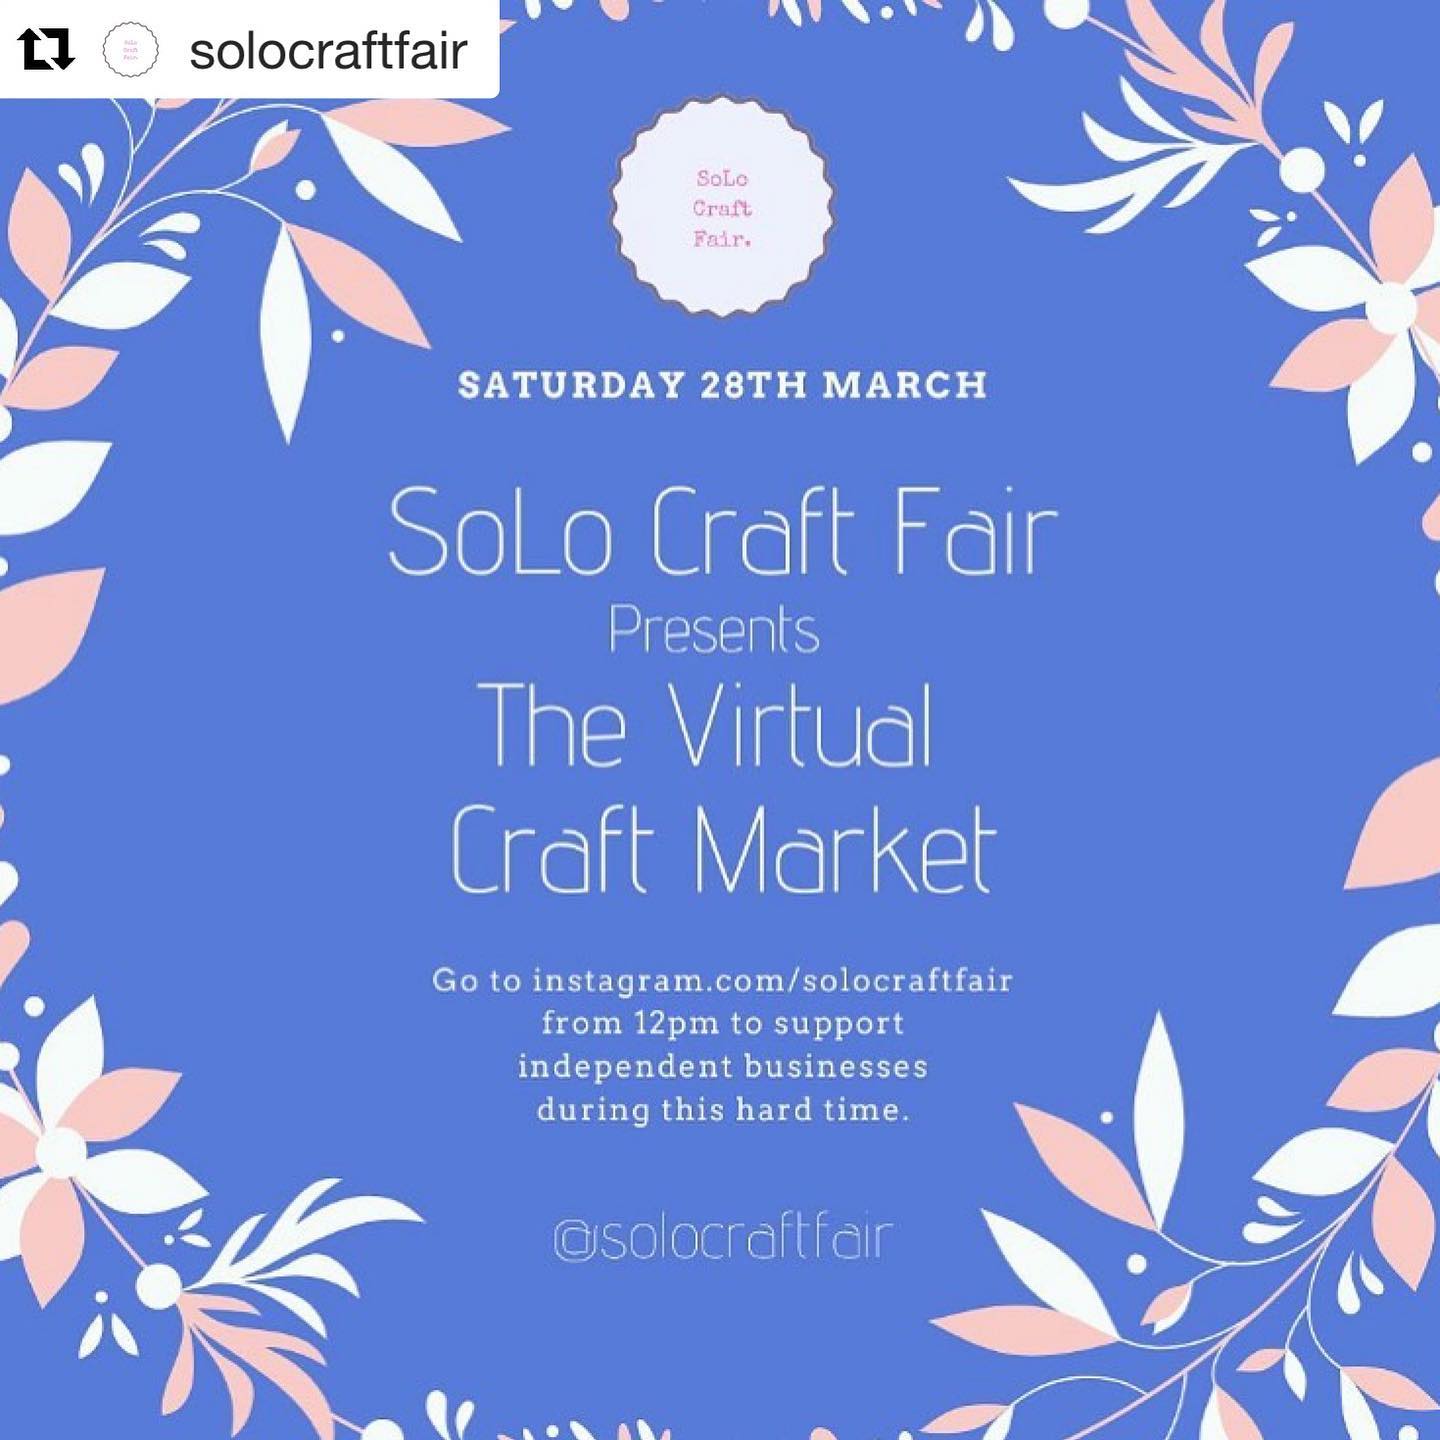 We’ll be joining this fabulous virtual market tomorrow! Take a look at @solocraftfair Instagram stories to see products by us and many more independent crafts people #supportsmallbusinesses #Repost @solocraftfair with @get_repost・・・One more sleep until tomorrow’s Virtual Market! Don’t forgot to log onto our stories tomorrow from 12... Stay safe and help support makers and artists during these challenging times by joining our Virtual Craft Market every Saturday between 12-2pm GMT. During our first market we had over 200 small businesses from across the world take part!To Visit:1. Make a cup of tea and get comfortable.2. Switch on to SoLo Craft Fair's Instagram stories between 12-2pm every Saturday. Please note only 100 stories are allowed at one time, so please check back 2-3 times throughout the event so you don't miss any traders. 3. If you see something you like, click through to their profile to find out how to buy and follow the maker. 4. Please be patient with postage, as this can be slower during these uncertain times.To Participate:1. During 12-2pm please make ONE story featuring a product with it's price and tag solocraftfair2. At some point within the 2 hour window we will share your story and you will become part of the 'market'3. Please note if you have another source of income at this time, please leave this opportunity for people who depend solely on their creative business as a livelihood. We want to support those most in need. 4. If you are going to be involved, please help promote this event. It is free to take part, therefor there is no budget to promote. The success of the week's event came down to everyone doing their bit to spread the word. Remember, we're trying to make an online community here! 5. You can find graphics to share for each week at www.instagram.com/solocraftfair6. Keep products family friendly! See you at www.instagram.com/solocraftfair every Saturday until this madness is over!